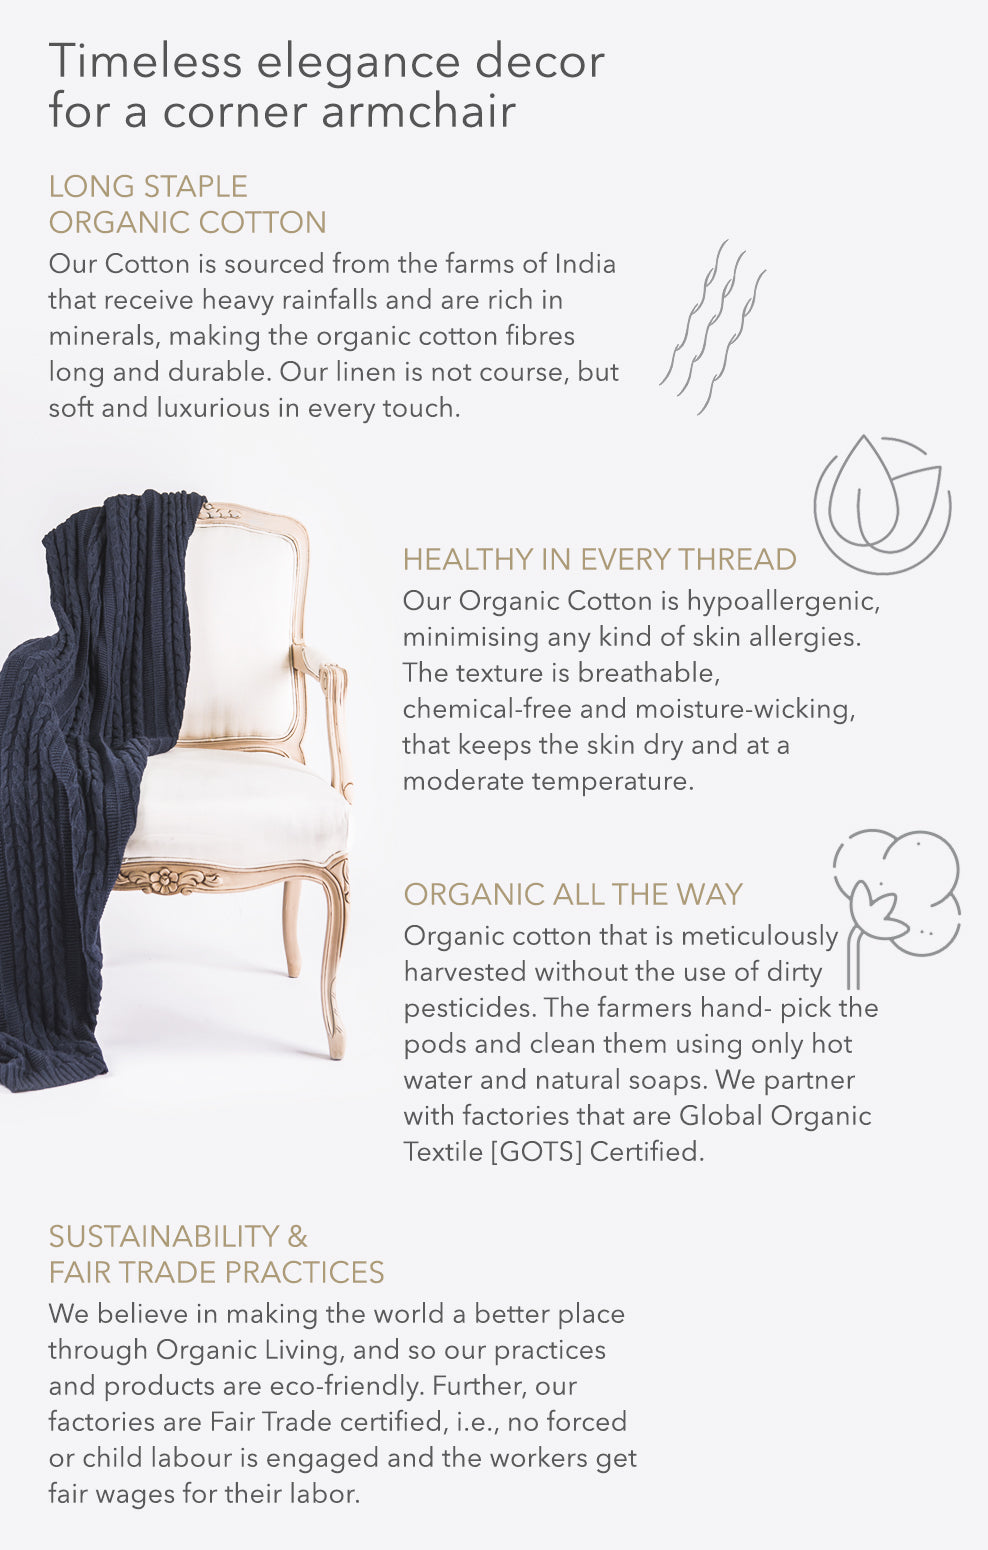 Cable Knit Organic Cotton Throws